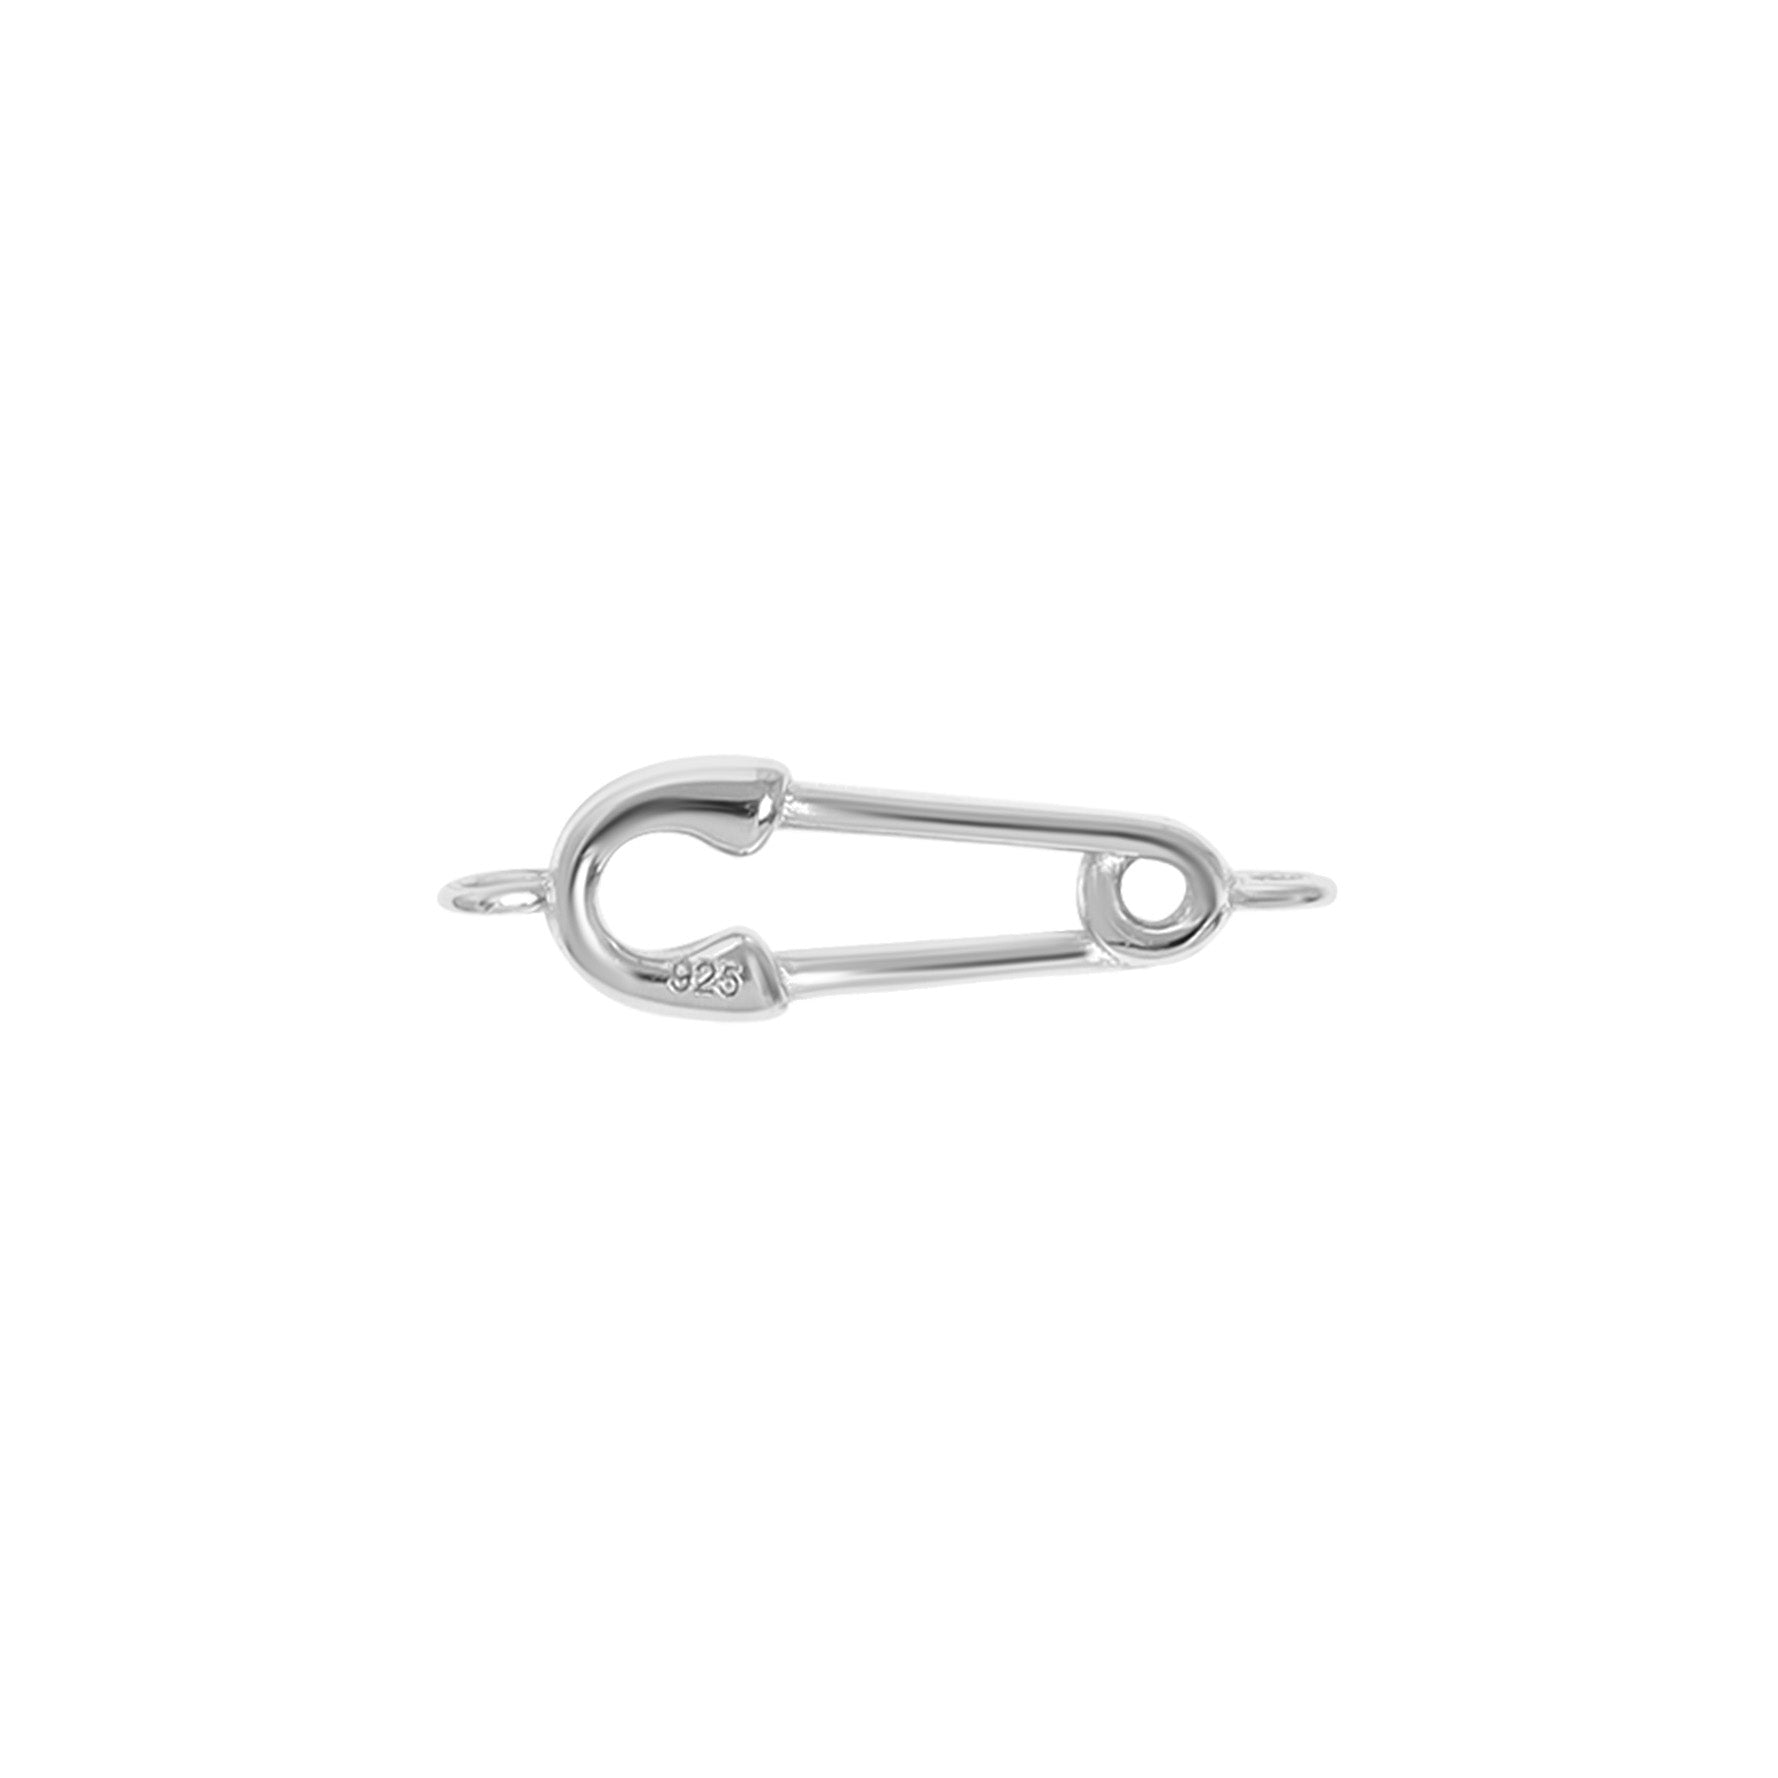 .925 Sterling Silver Horizontal Safety Pin Charm for Permanent Jewelry / PMJ1027